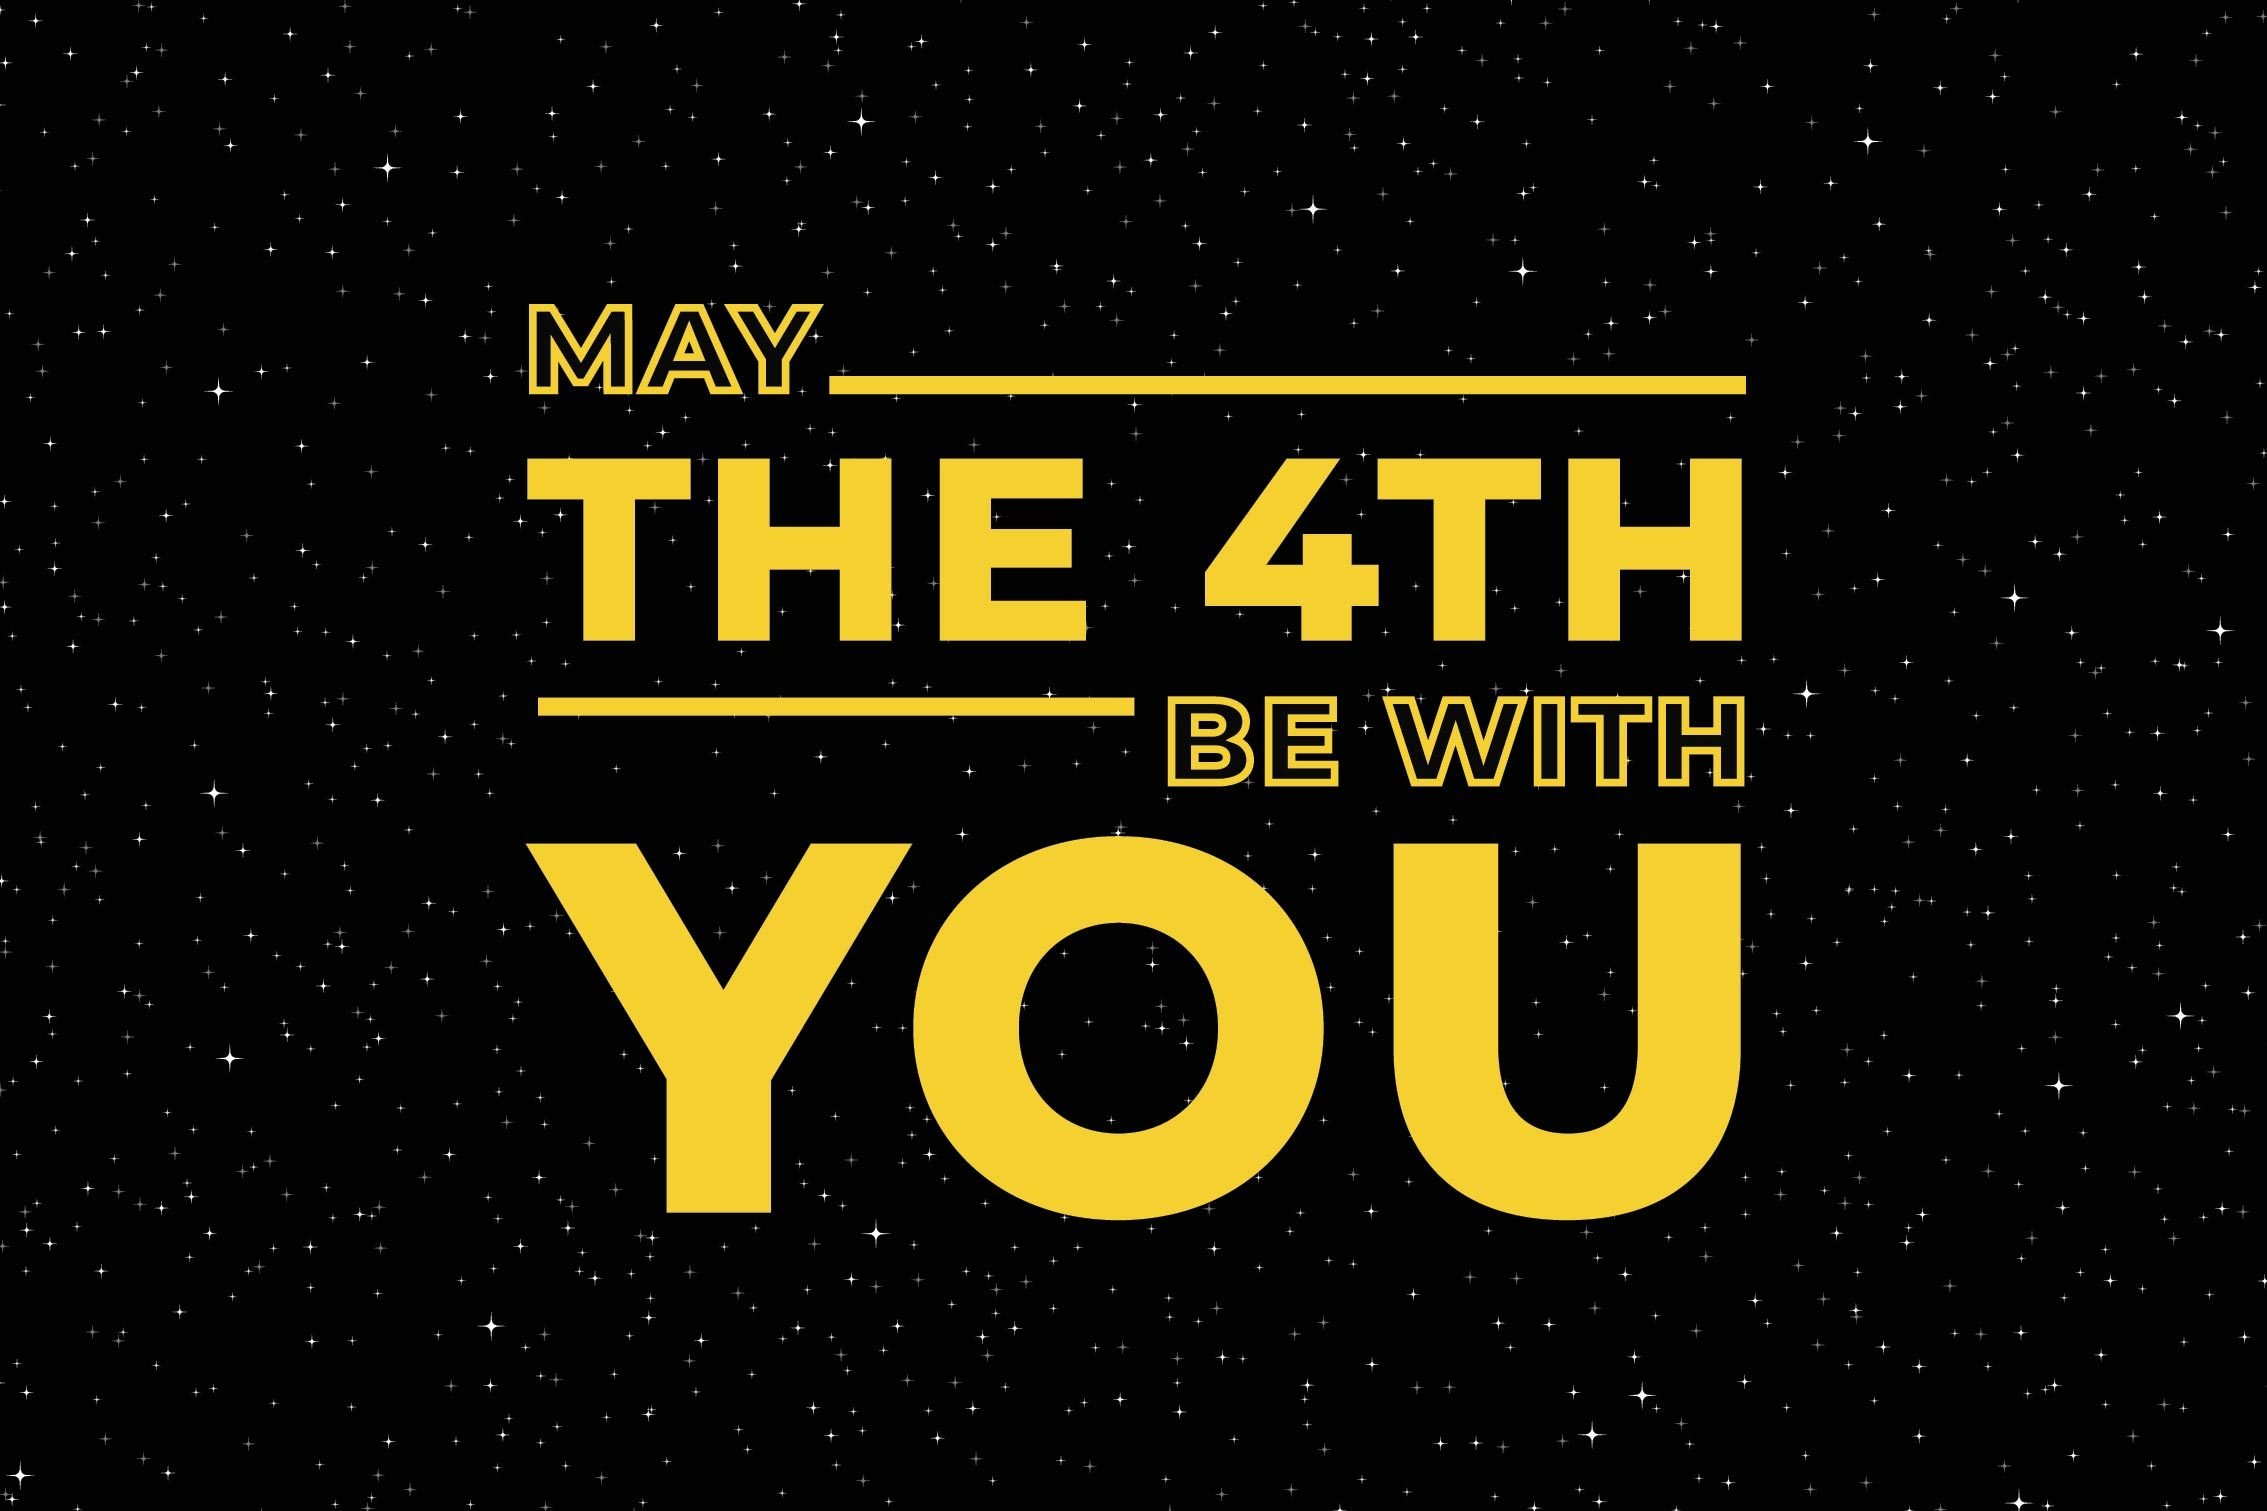 Picture of May the 4th Be With You for Star Wars Day